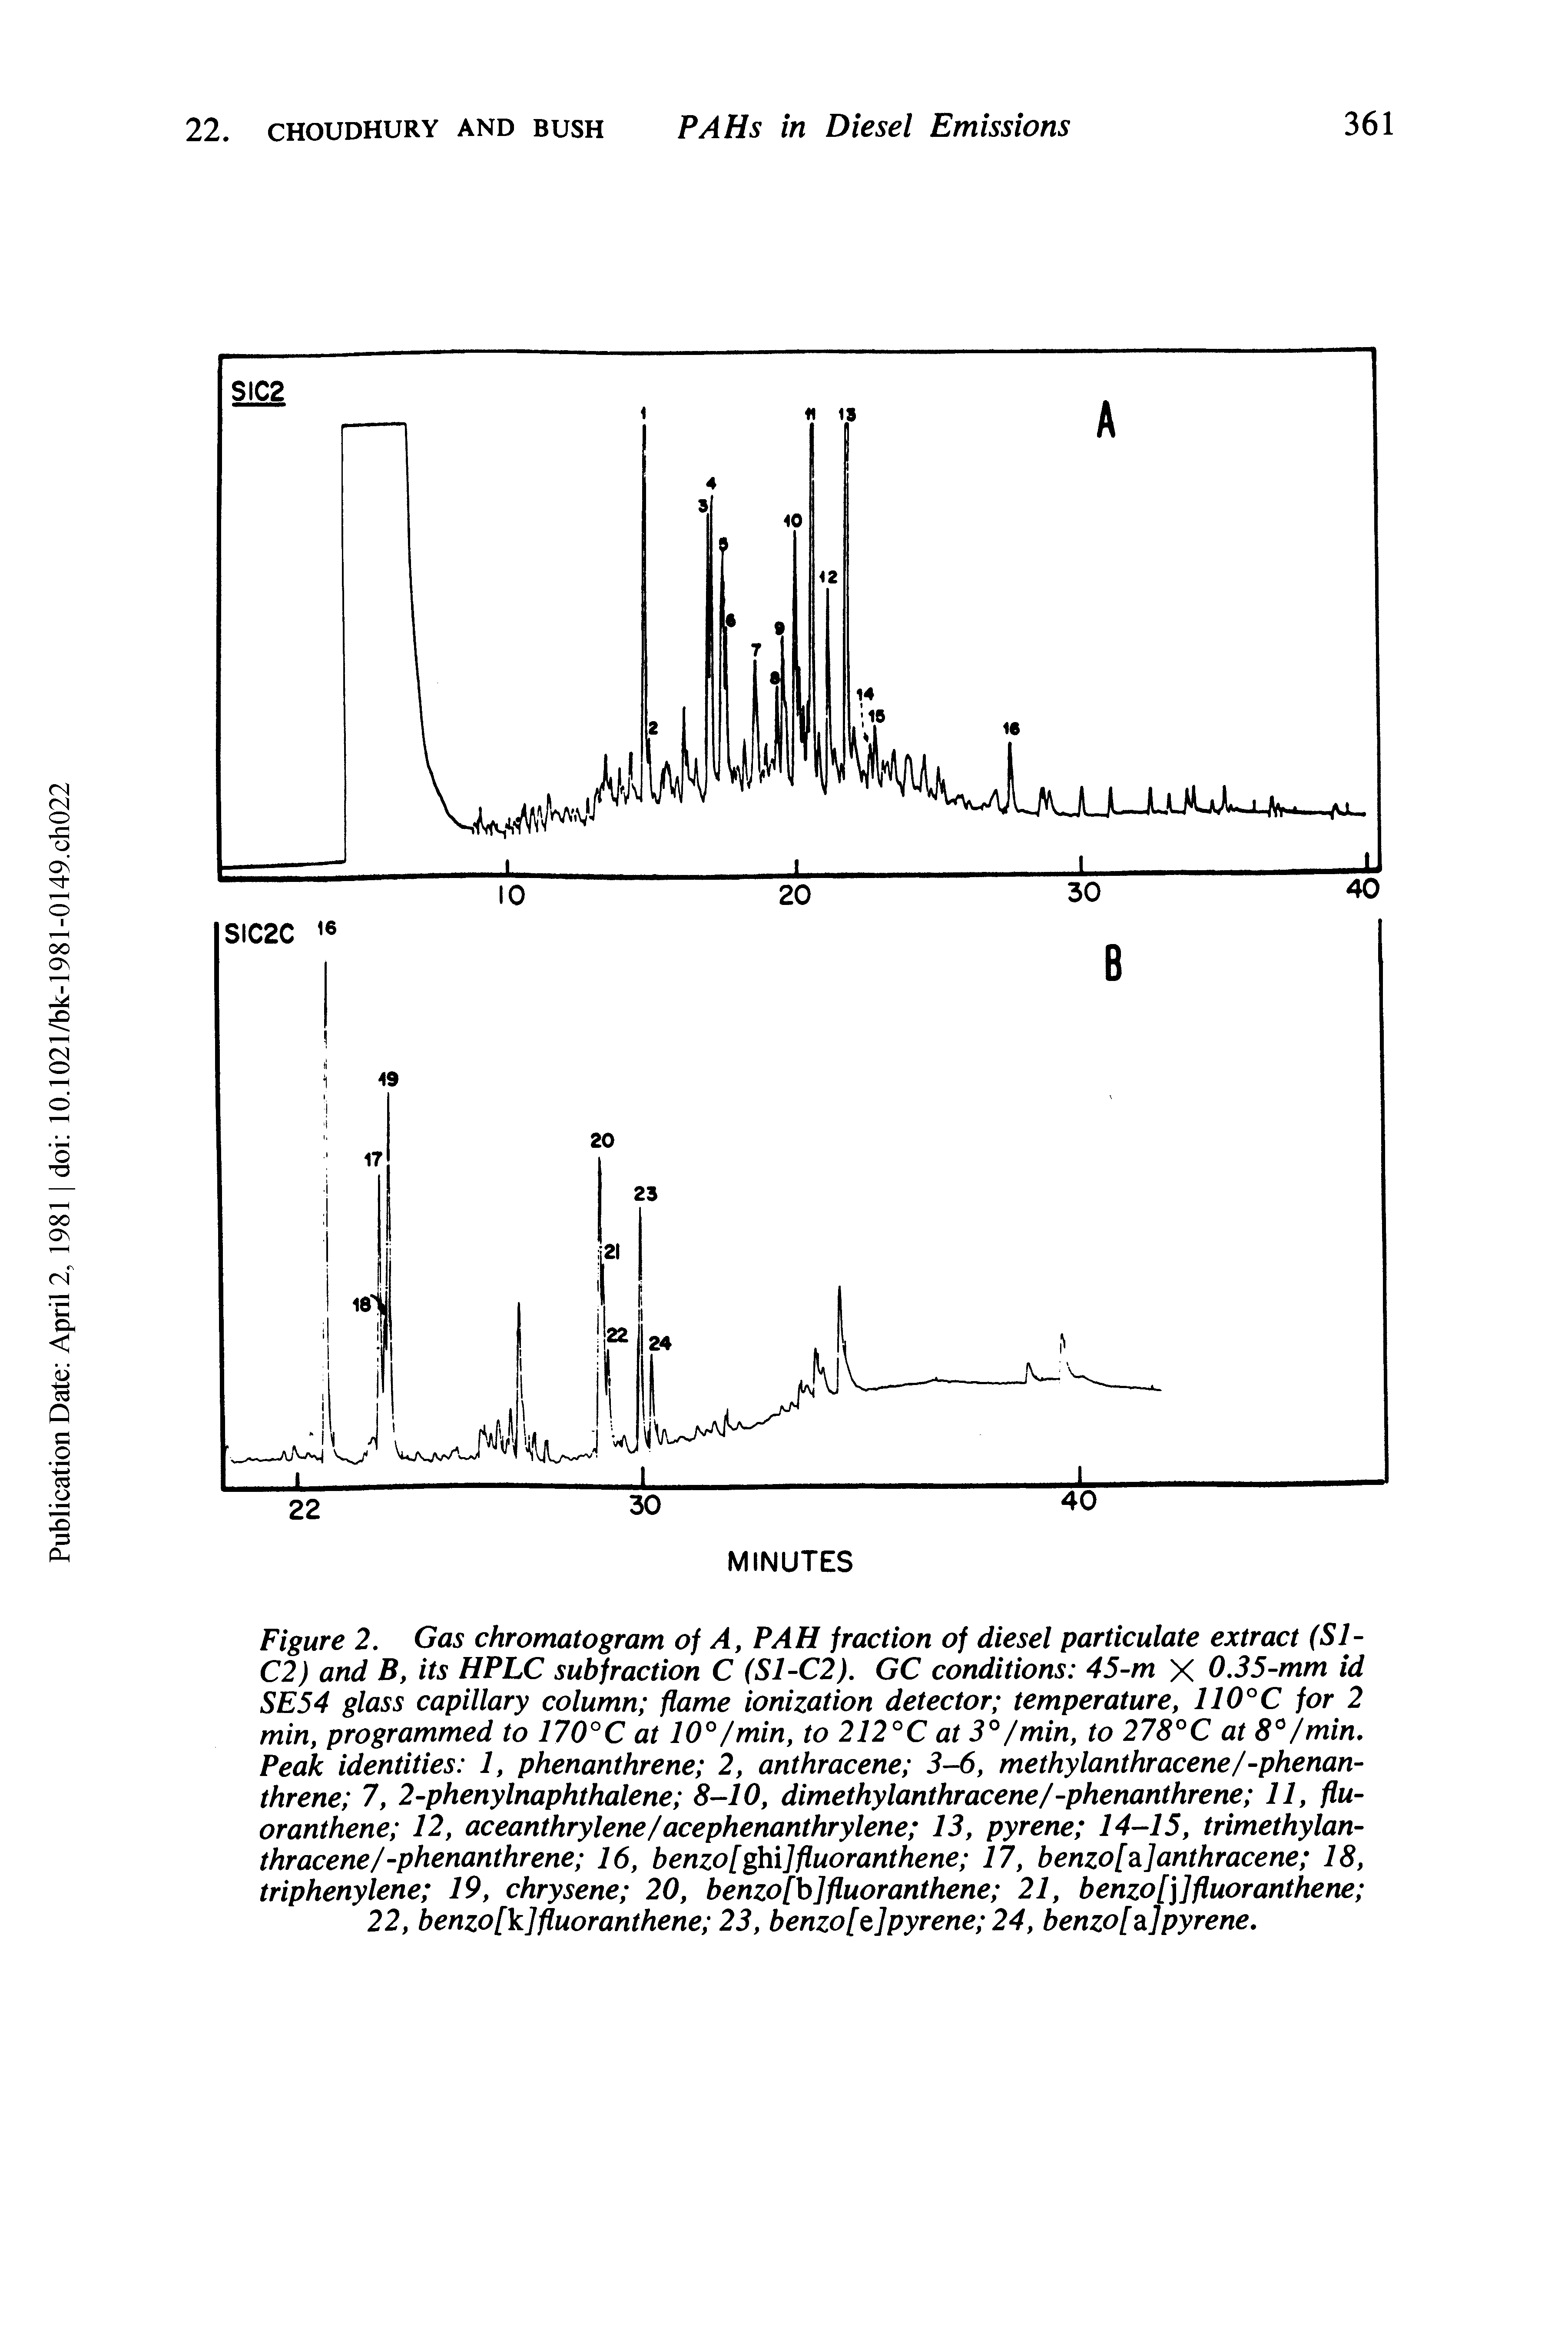 Figure 2. Gas chromatogram of A, PAH fraction of diesel particulate extract (Sl-C2) and By its HPLC subfraction C (S1-C2). GC conditions 45- X 0.35-mm id SE54 glass capillary column flame ionization detector temperature, 110°C for 2 min, programmed to 170°C at 10°/min, to 212°C at 3°/min, to 278°C at 8°/min. Peak identities 1, phenanthrene 2, anthracene 3-6, methylanthracene/-phenan-threne 7, 2-phenylnaphthalene 8-10, dimethylanthracene/-phenanthrene 11, fluoranthene 12, aceanthrylene/acephenanthrylene 13, pyrene 14-15, trimethylan-thracene/-phenanthrene 16, benzo [ghi]fluoranthene 17, benzo[a/anthracene 18, triphenylene 19, chrysene 20, benzo[b]fluoranthene 21, benzo[]]fluoranthene ...